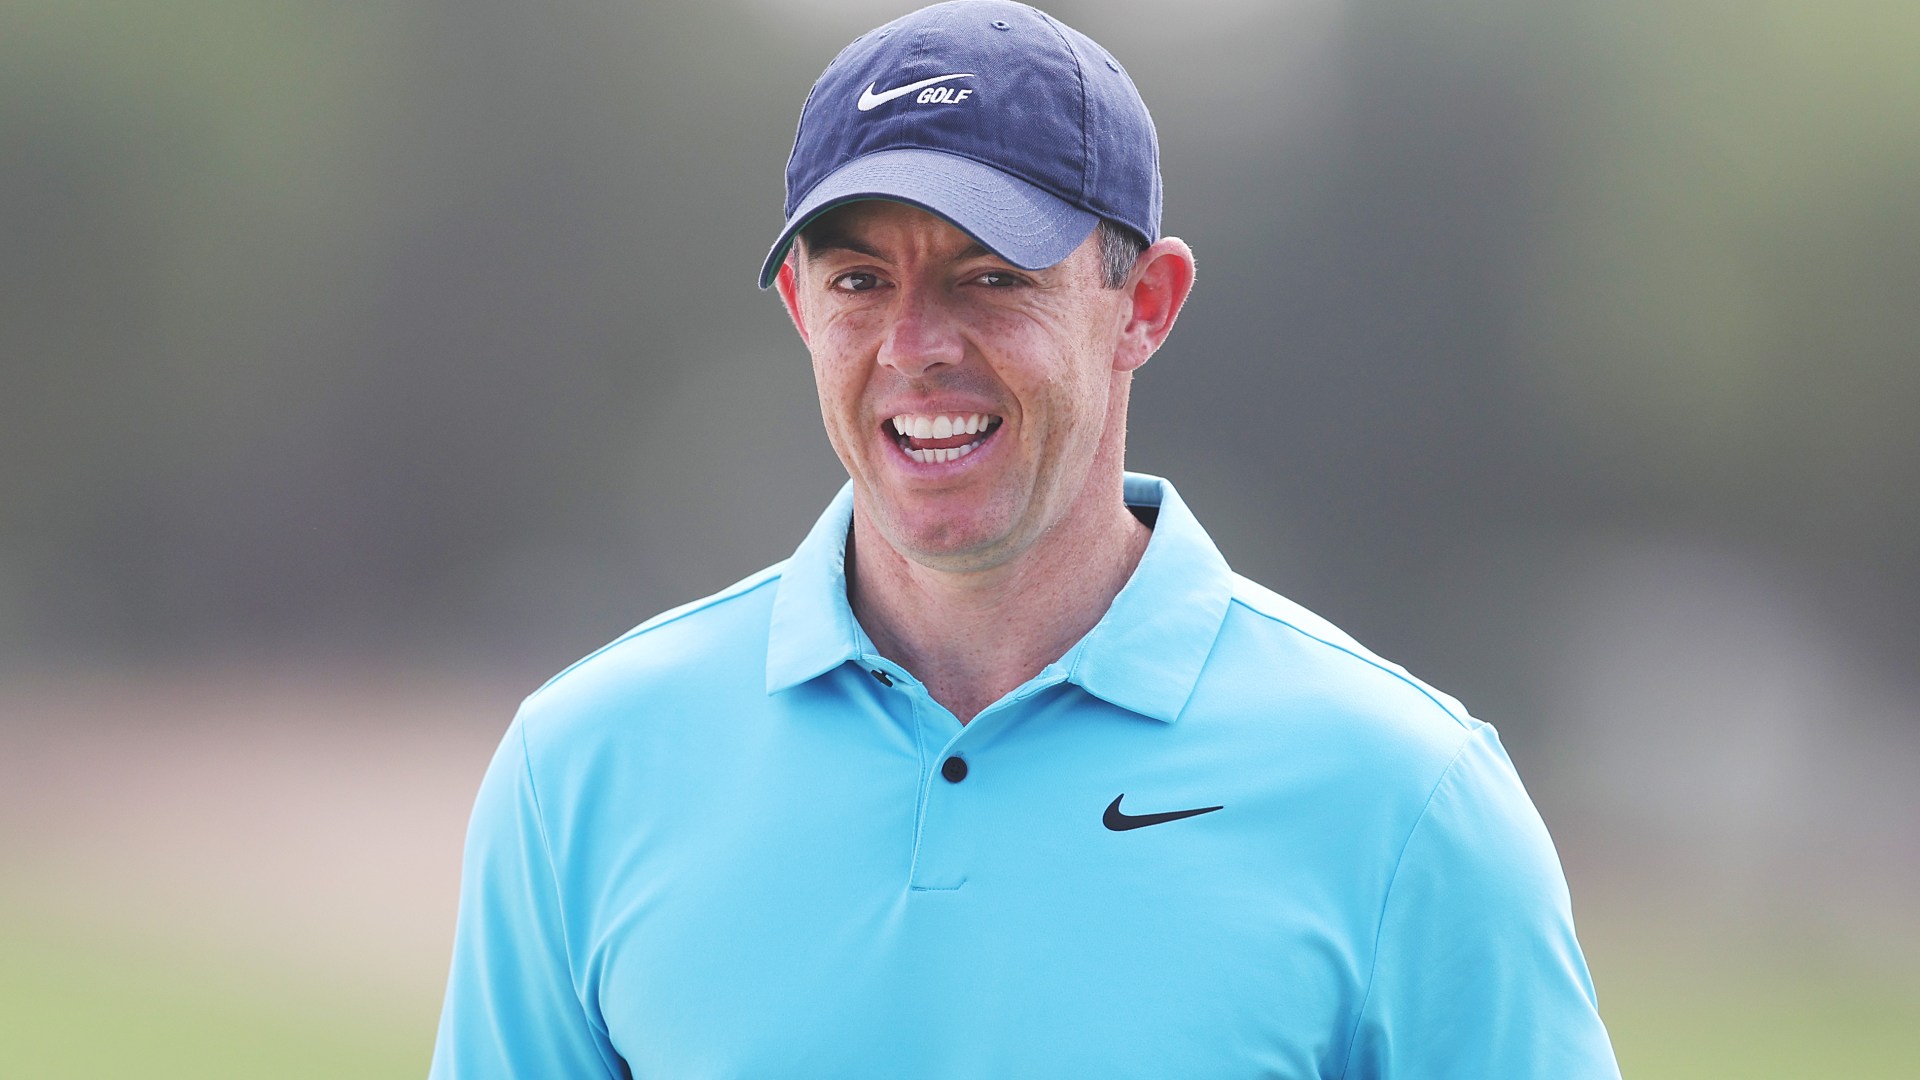 Rory McIlroy reveals stunning new side-hustle with Tiger Woods that will replace NFL on prime-time television